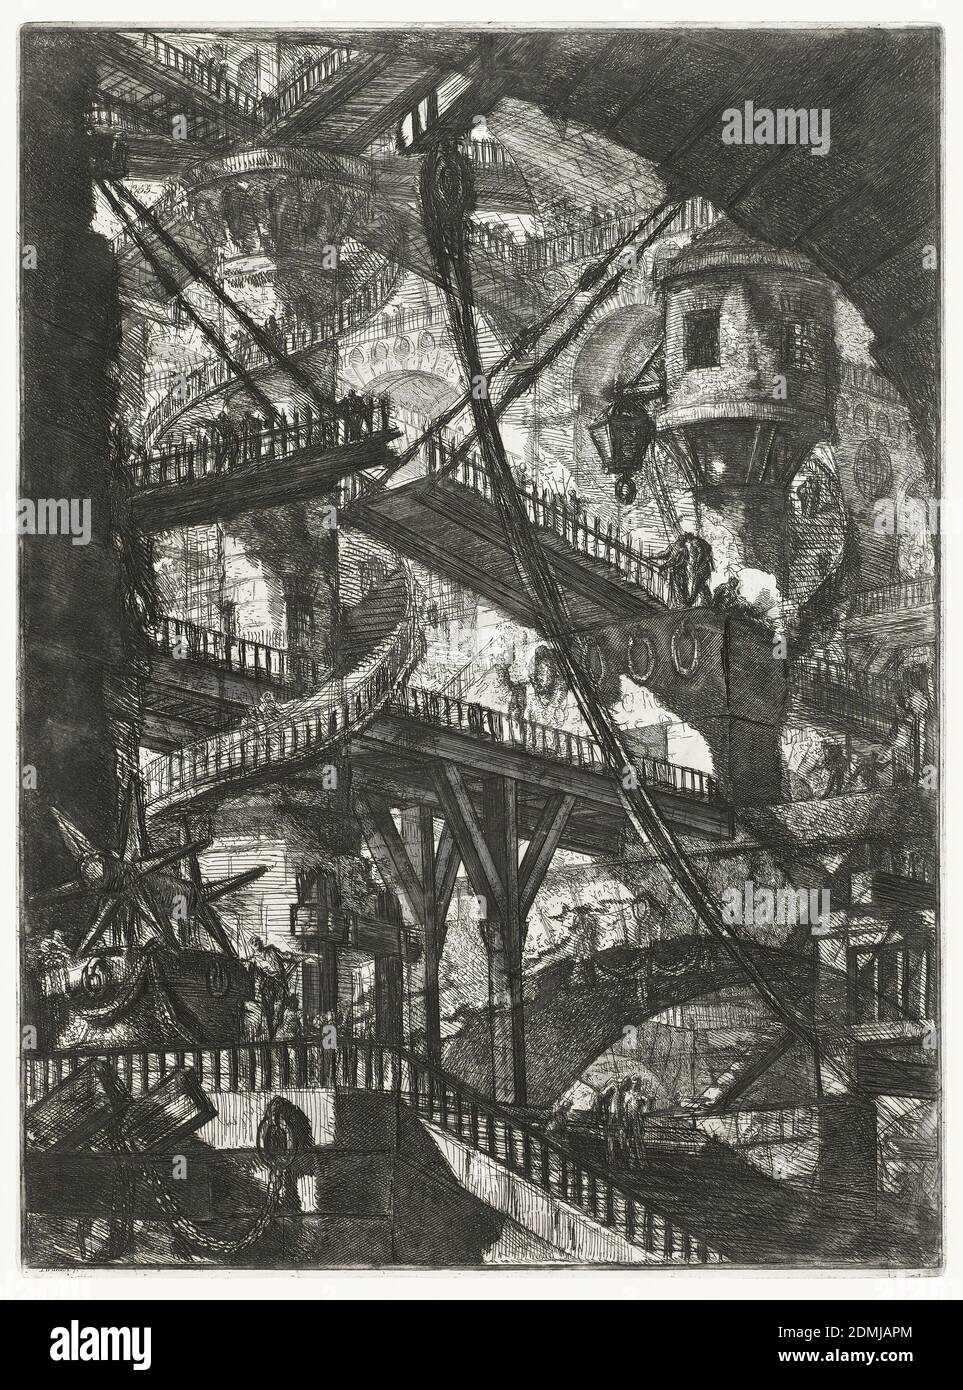 The Drawbridge, plate VII from the series Carceri d'Invenzione, Giovanni Battista Piranesi, Italian, 1720–1778, Etching on white laid paper, Vertical rectangle. Wooden bridges connect piers and arcades in the distance. Spiral staircases on piers connect several bridges., Italy, 1745 (printed later), architecture, Print Stock Photo